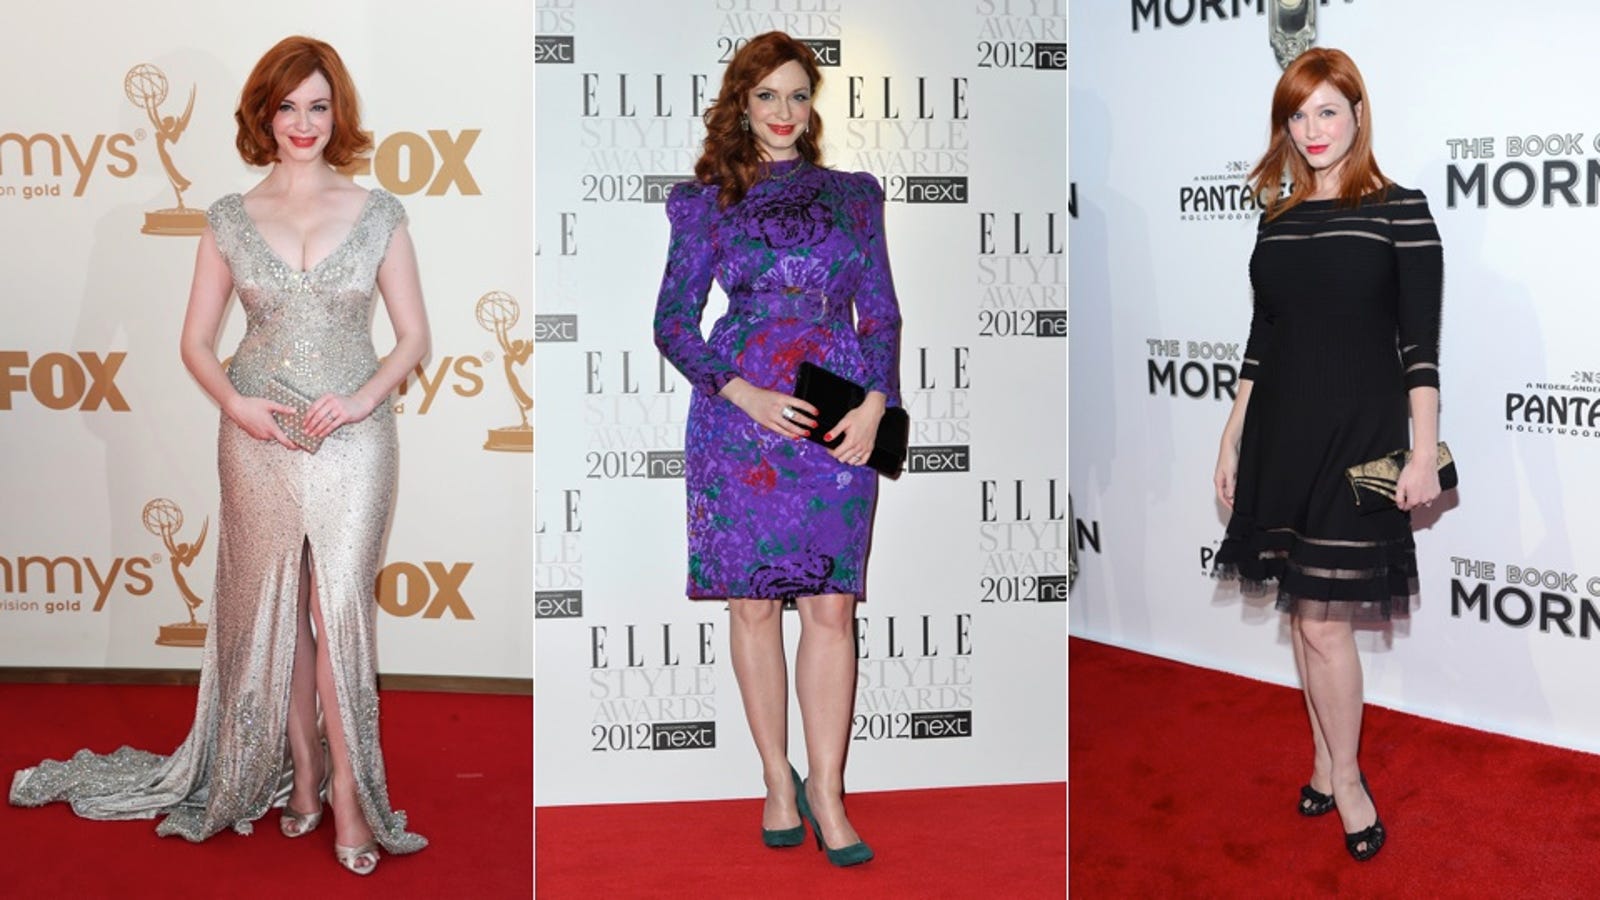 In What Universe Is Christina Hendricks Body An Imperfection